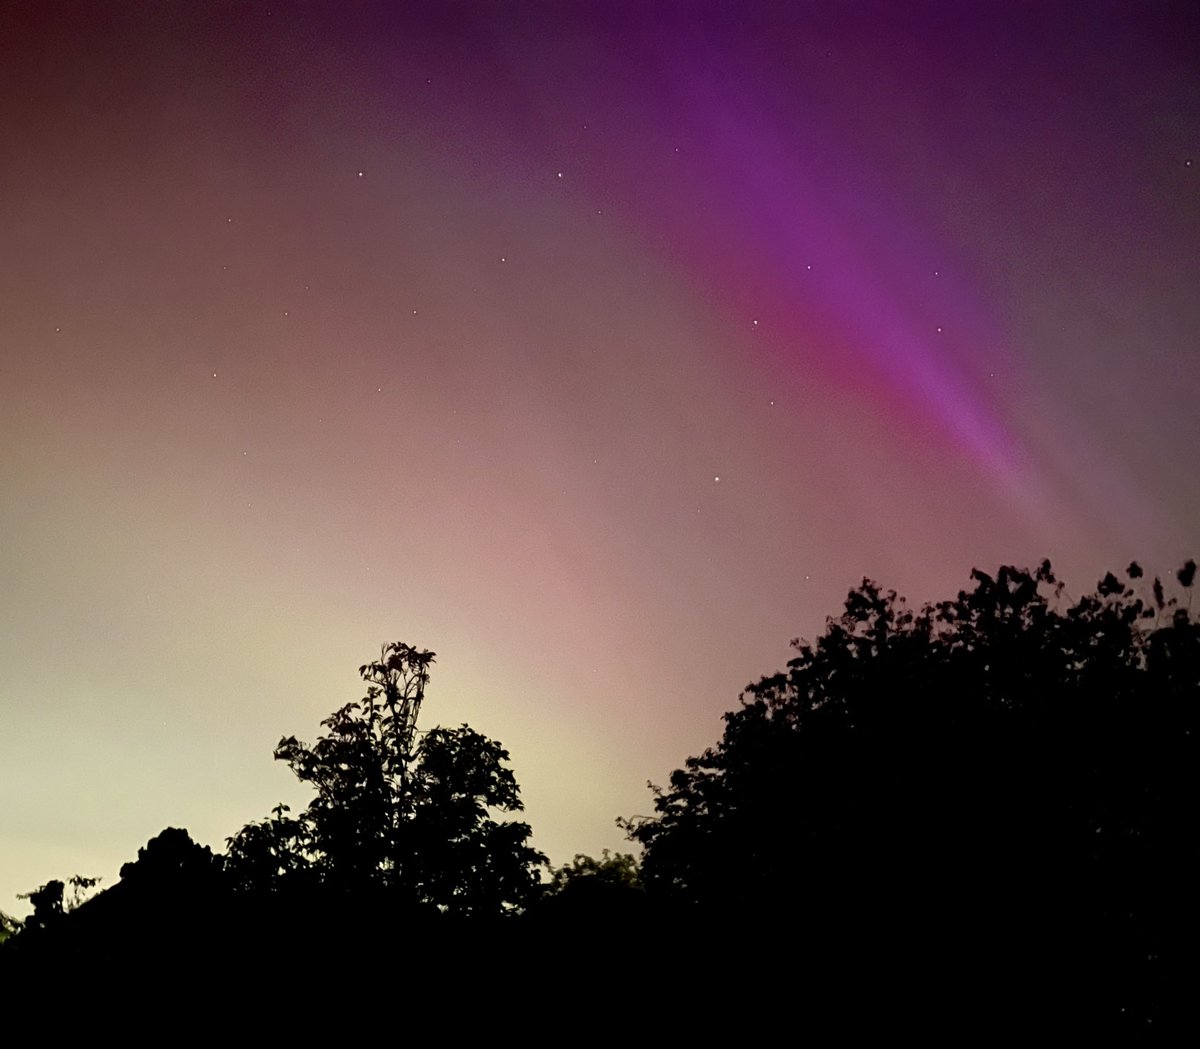 Last night the aurora borealis danced gracefully across Lincolnshire, creating a magical display ✨ Did you catch a glimpse of the northern lights last night? 🌌 #northernlights #auroraborealis #lincolnshireskies